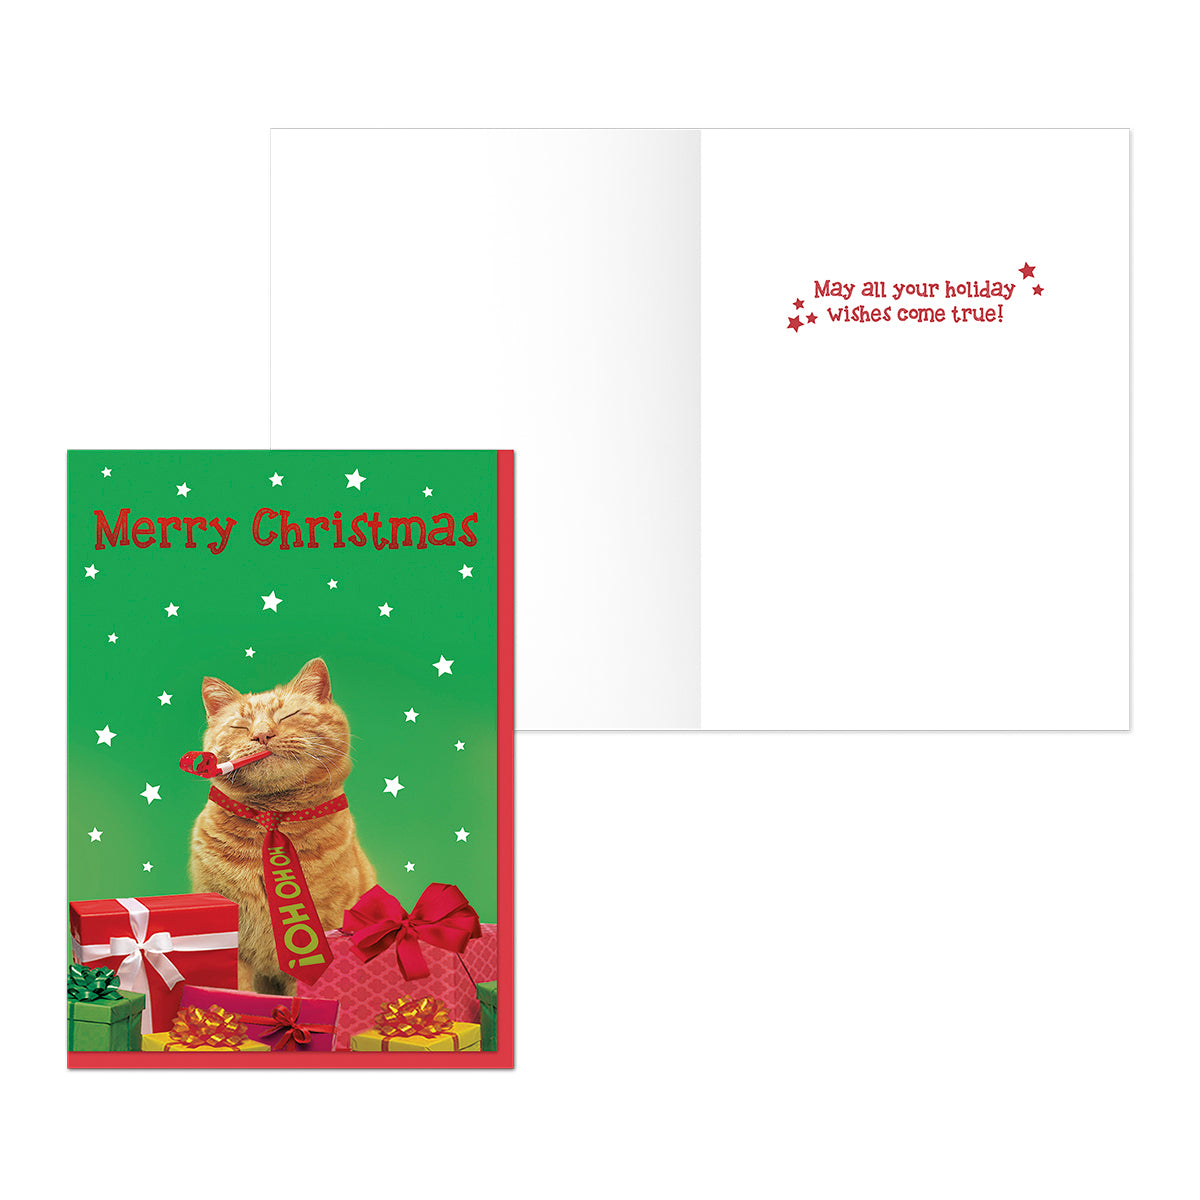 48pk Merry Christmas Cards Bulk Assortment Holiday Card Pack with Foil & Glitter